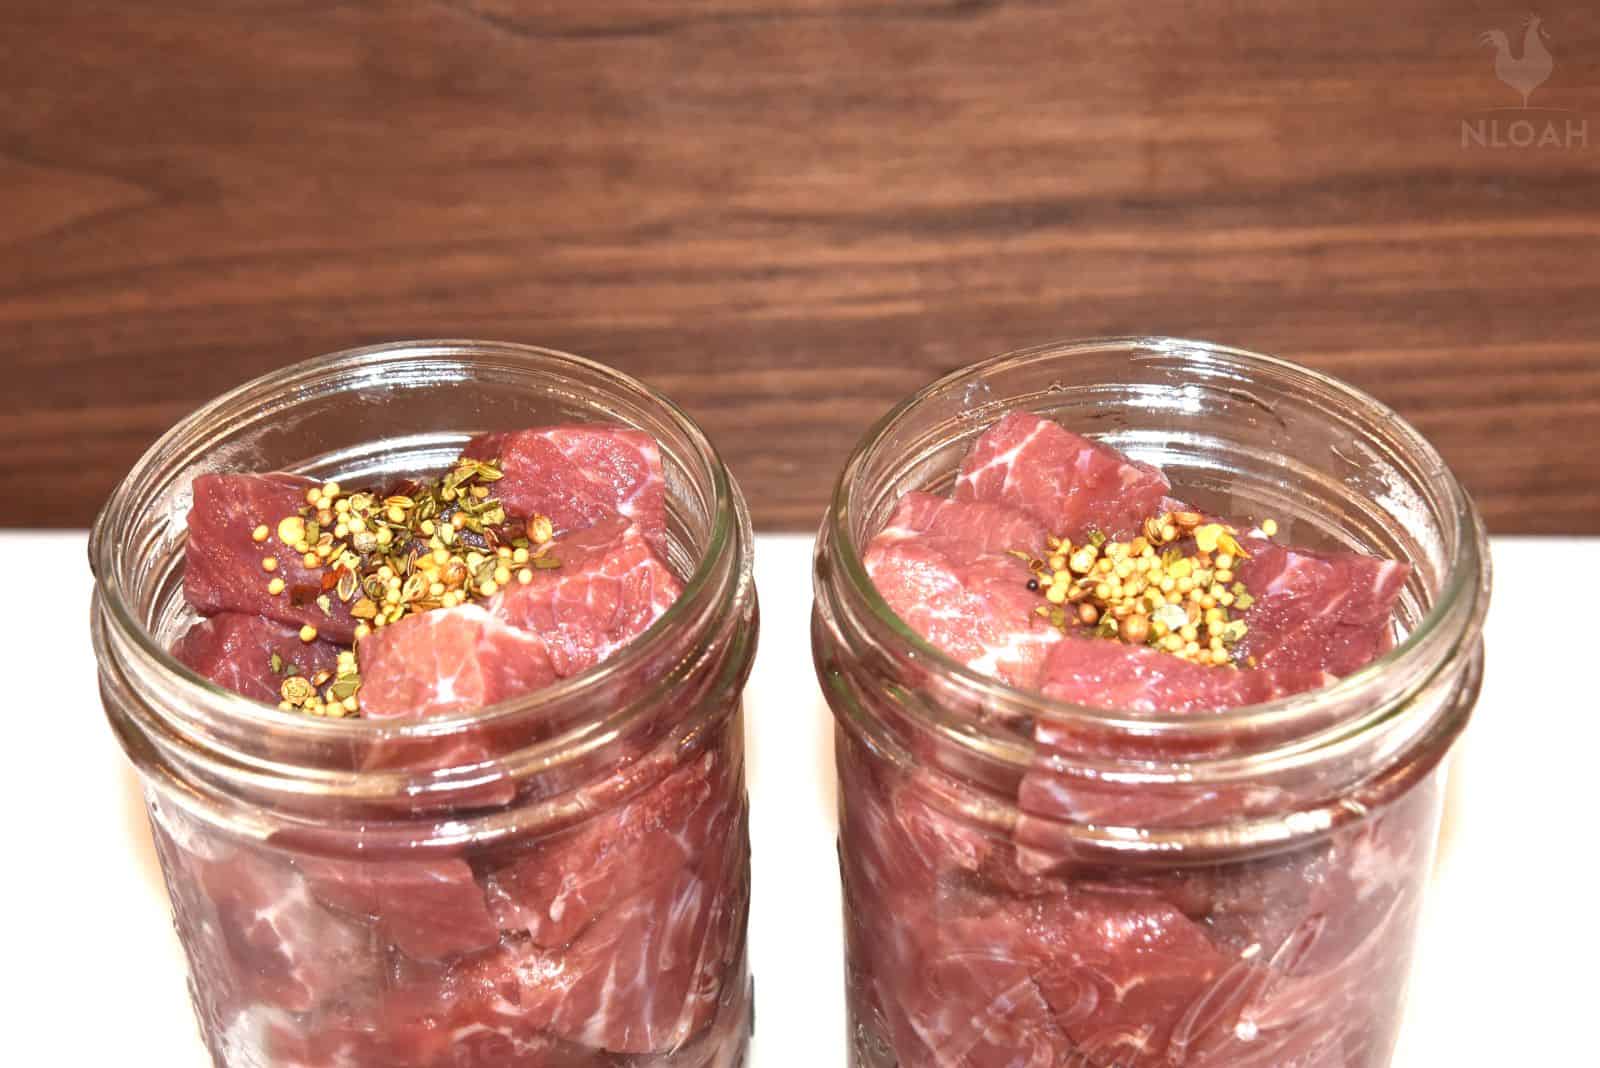 corned beef in jars ready for canning